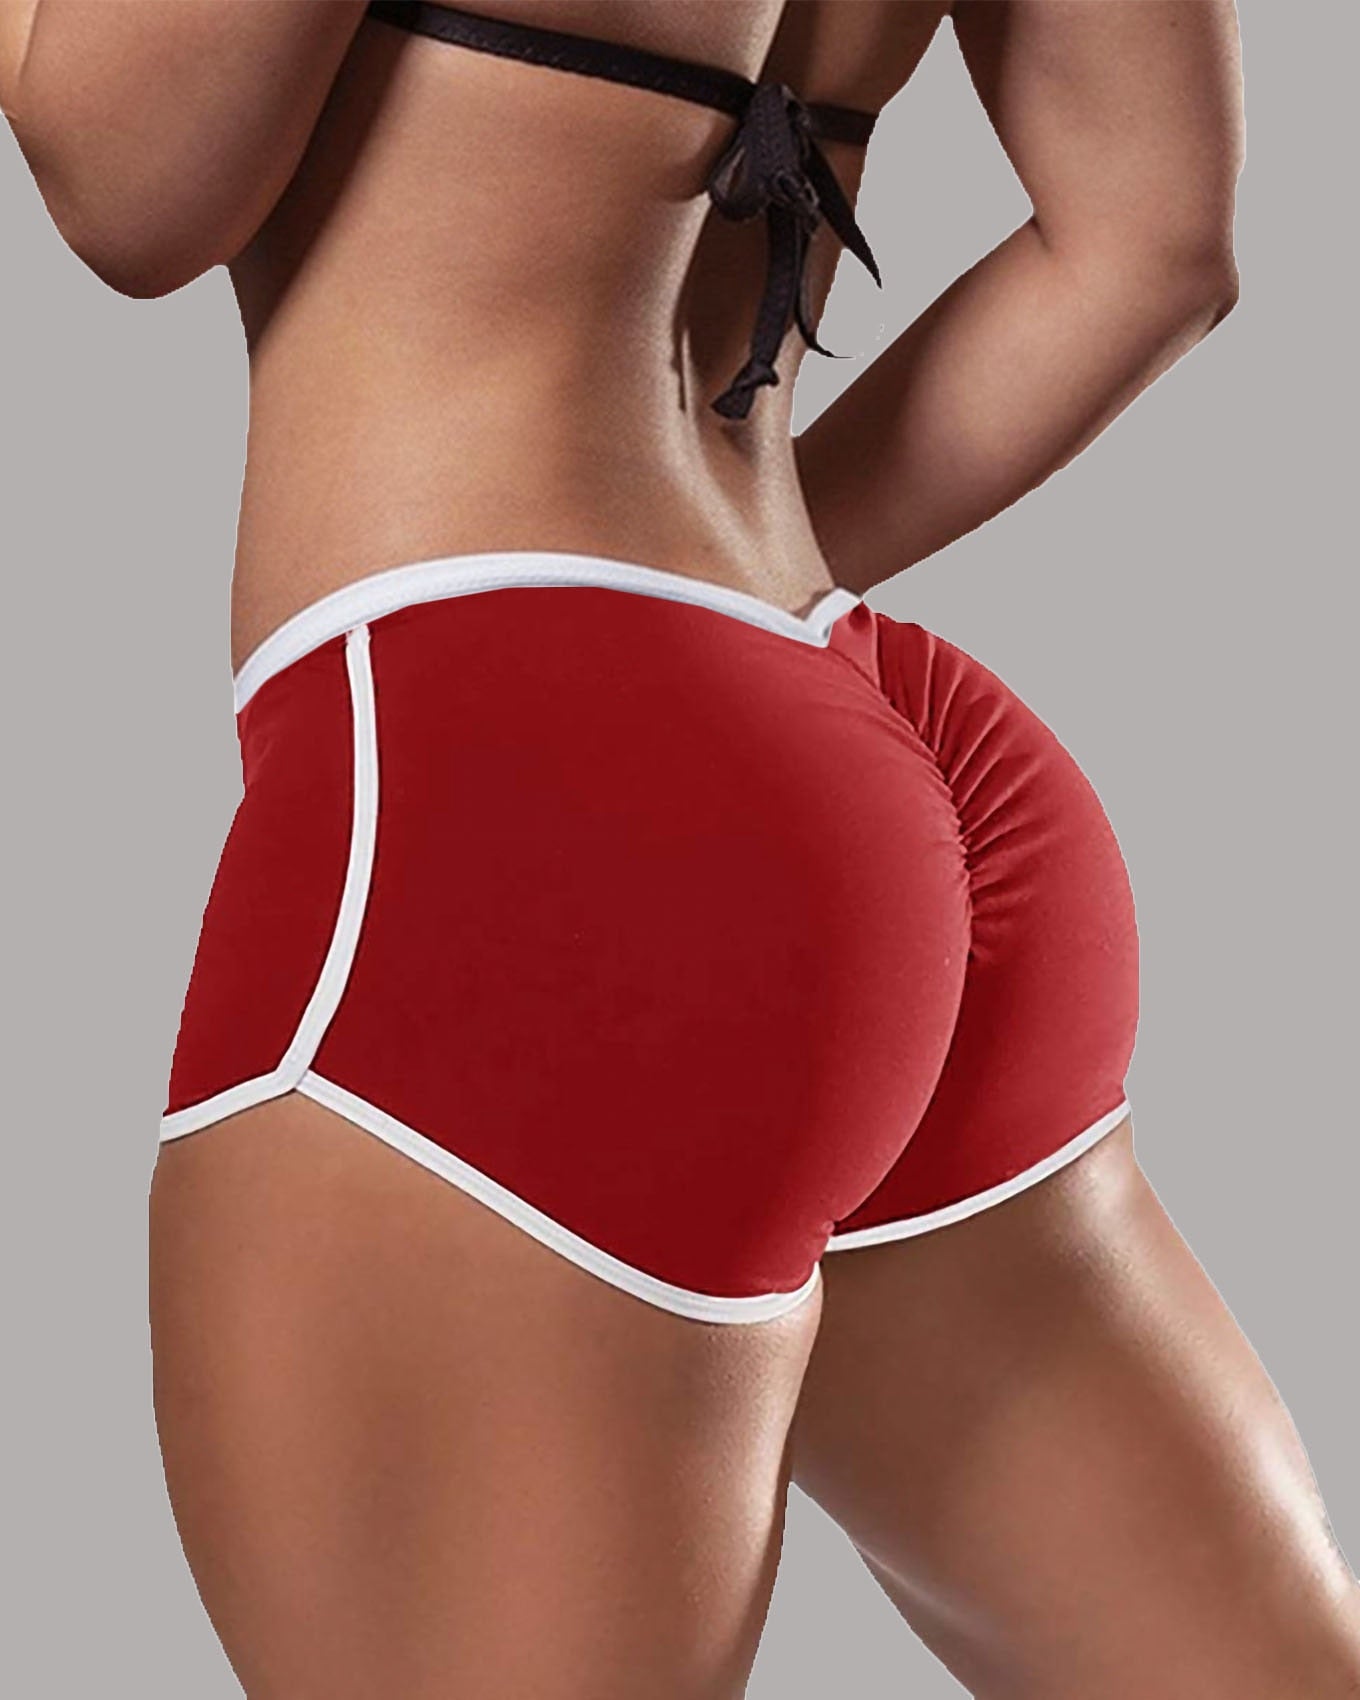 Geumxl New Summer Sport Shorts Women's cycling shorts Elasticated Seamless Fitness Leggings Push Up Gym Training Gym Tights Short